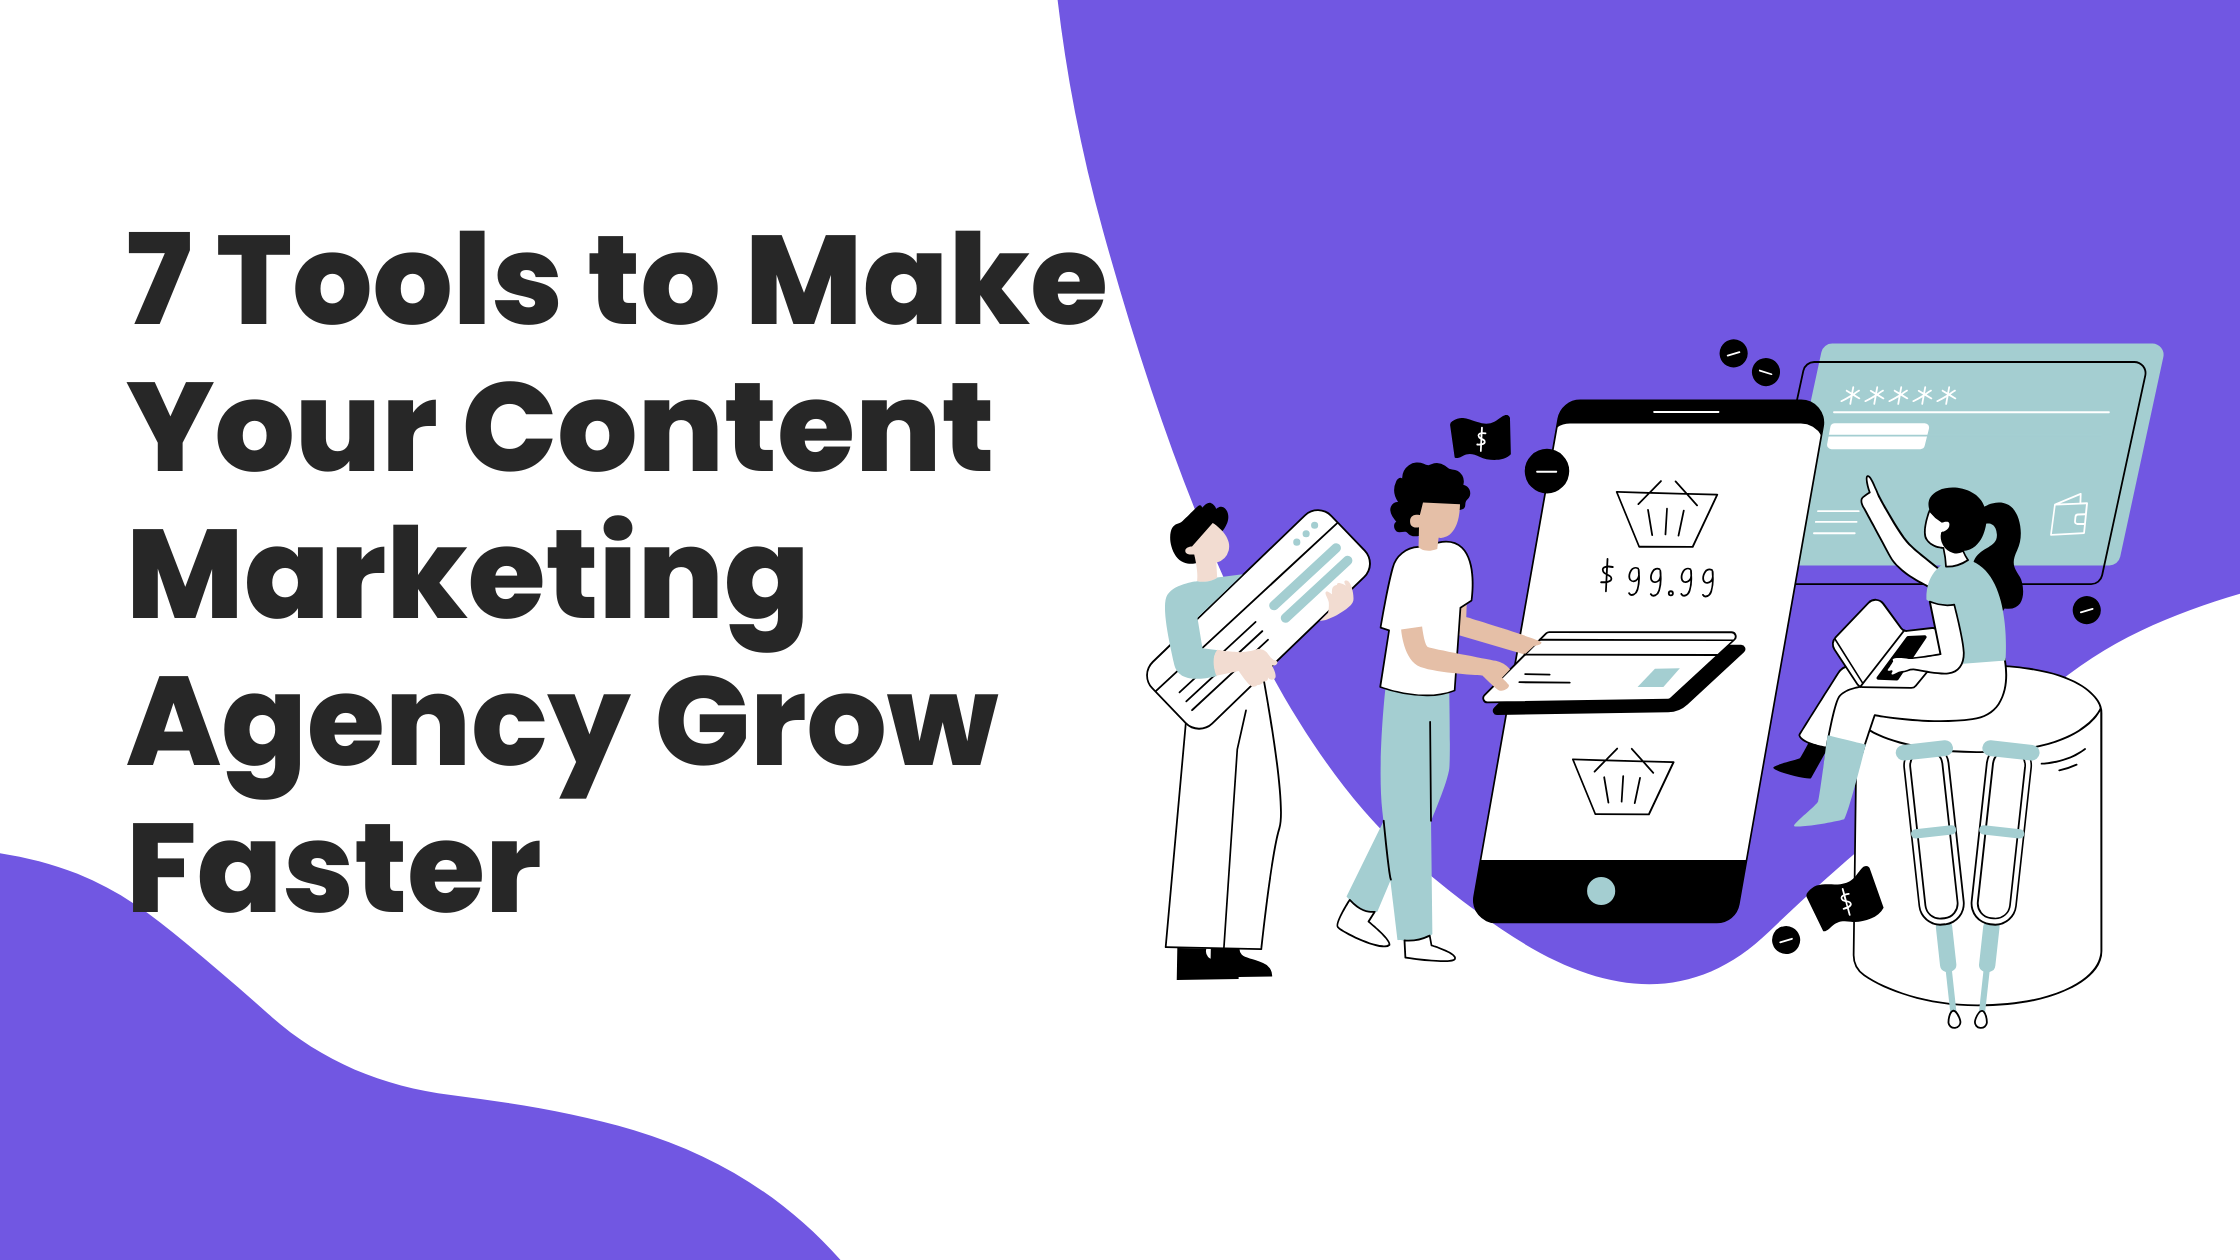 7 Tools to Make Your Content Marketing Agency Grow Faster